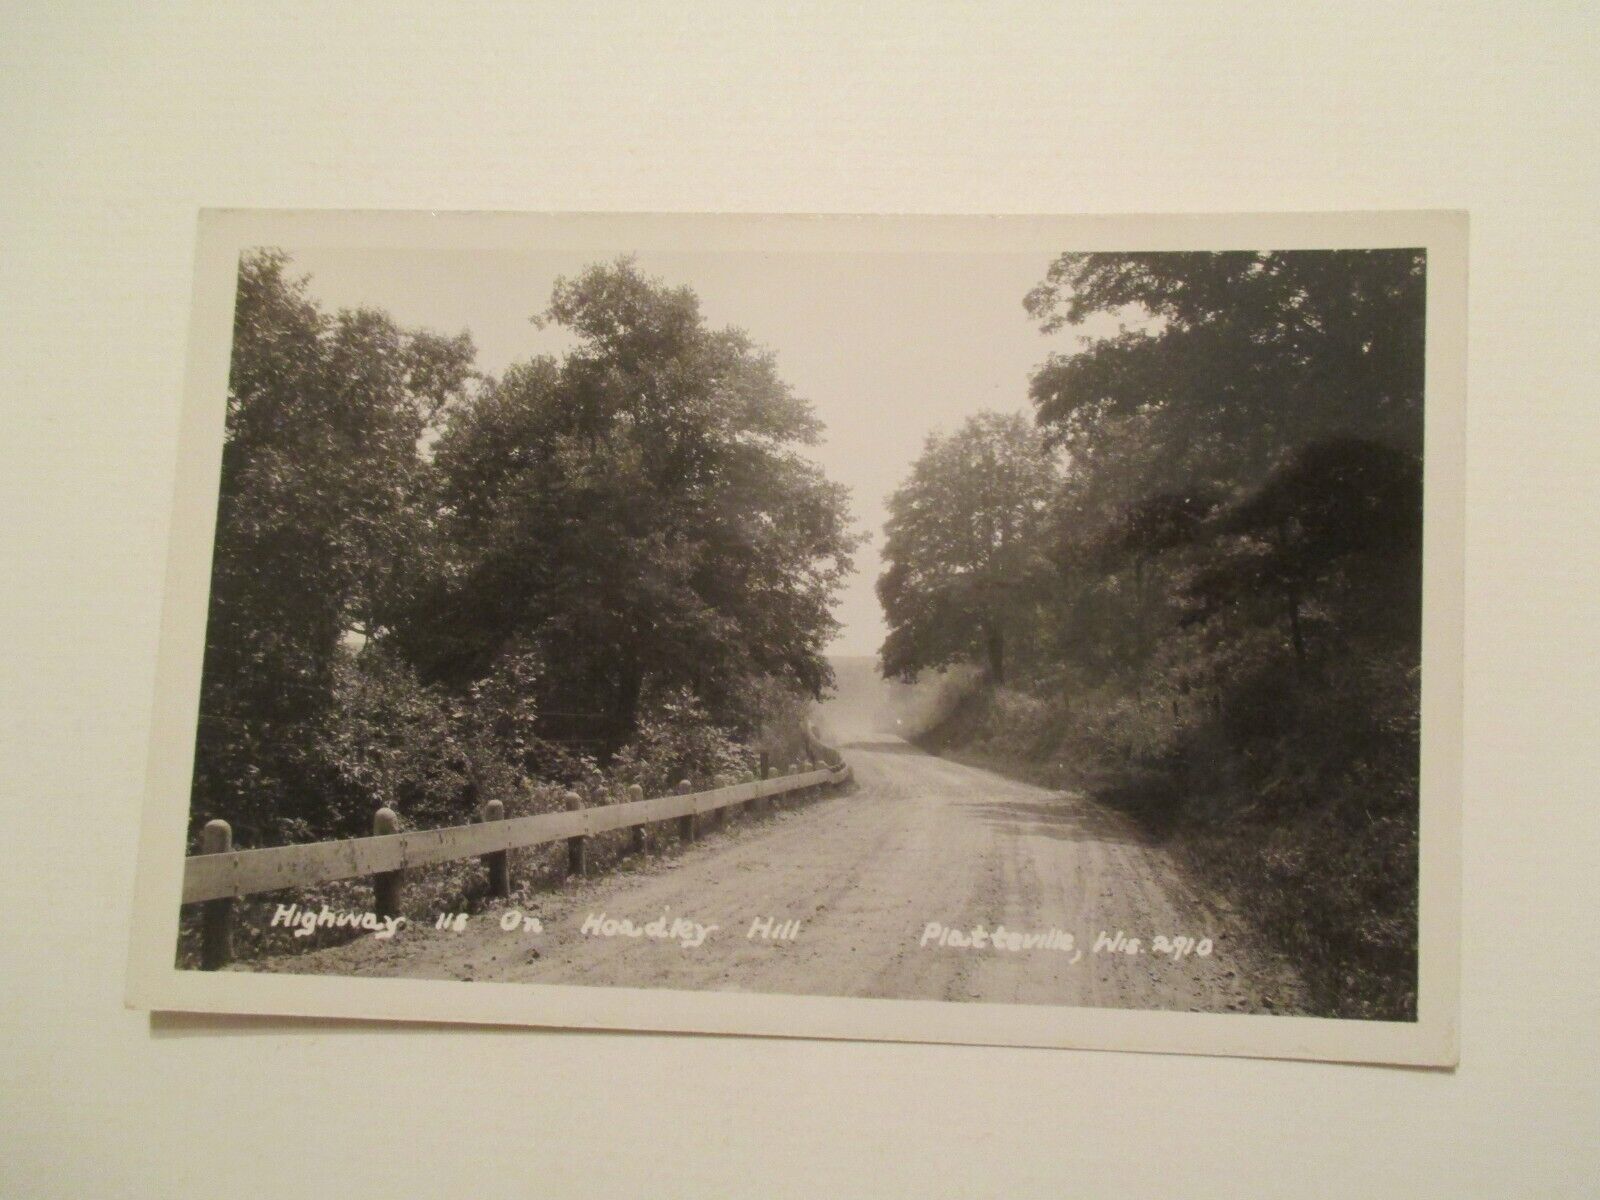 RPPC Platteville Wisconsin Postcard Highway 115 on Hoadley Hill Real Photo WI